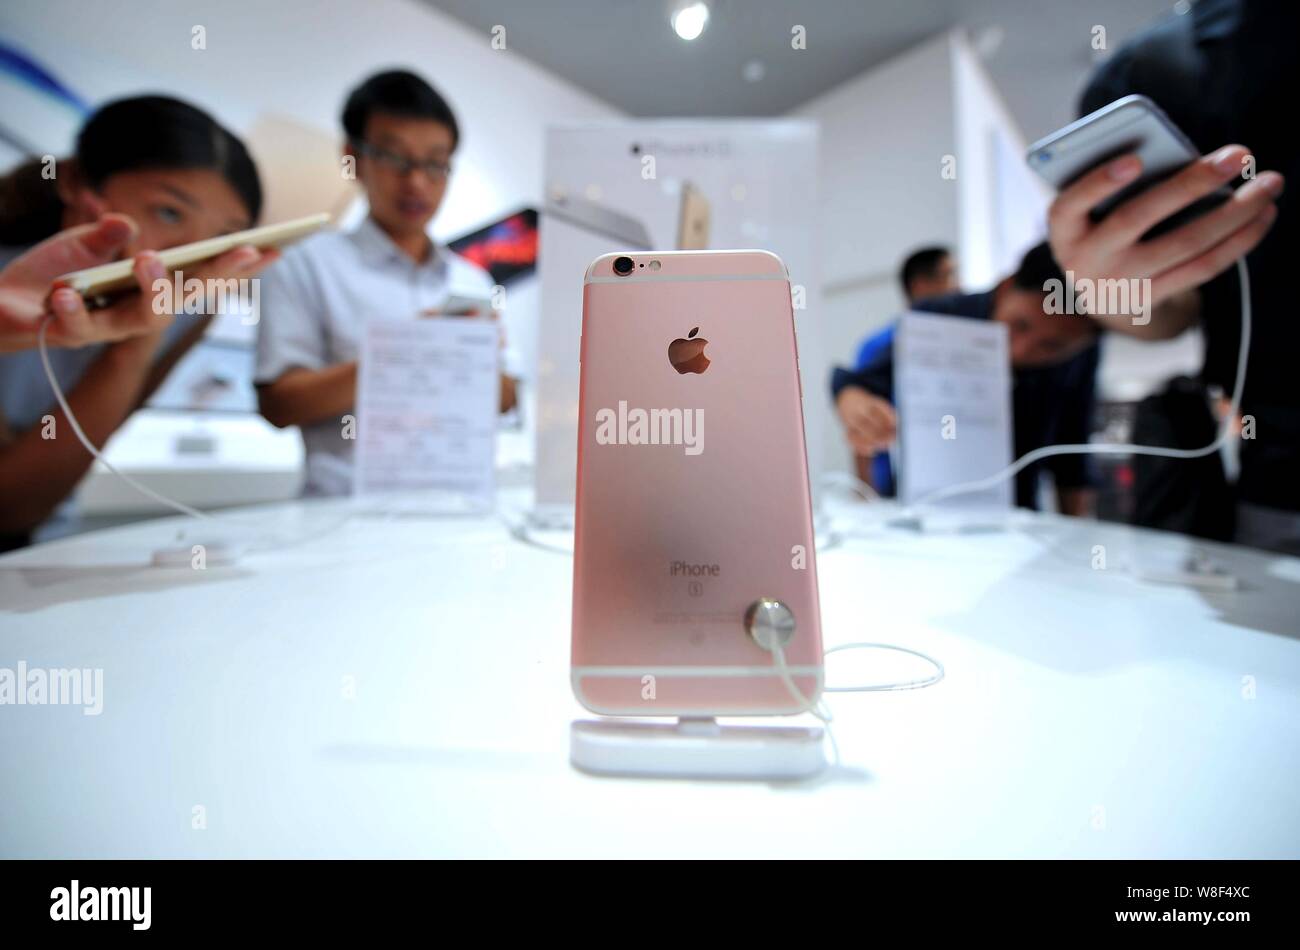 Customers try out iPhone 6s smartphones at an Apple store in Xining city, south China's Guangxi Zhuang Autonomous Region, 25 September 2015.   Enthusi Stock Photo